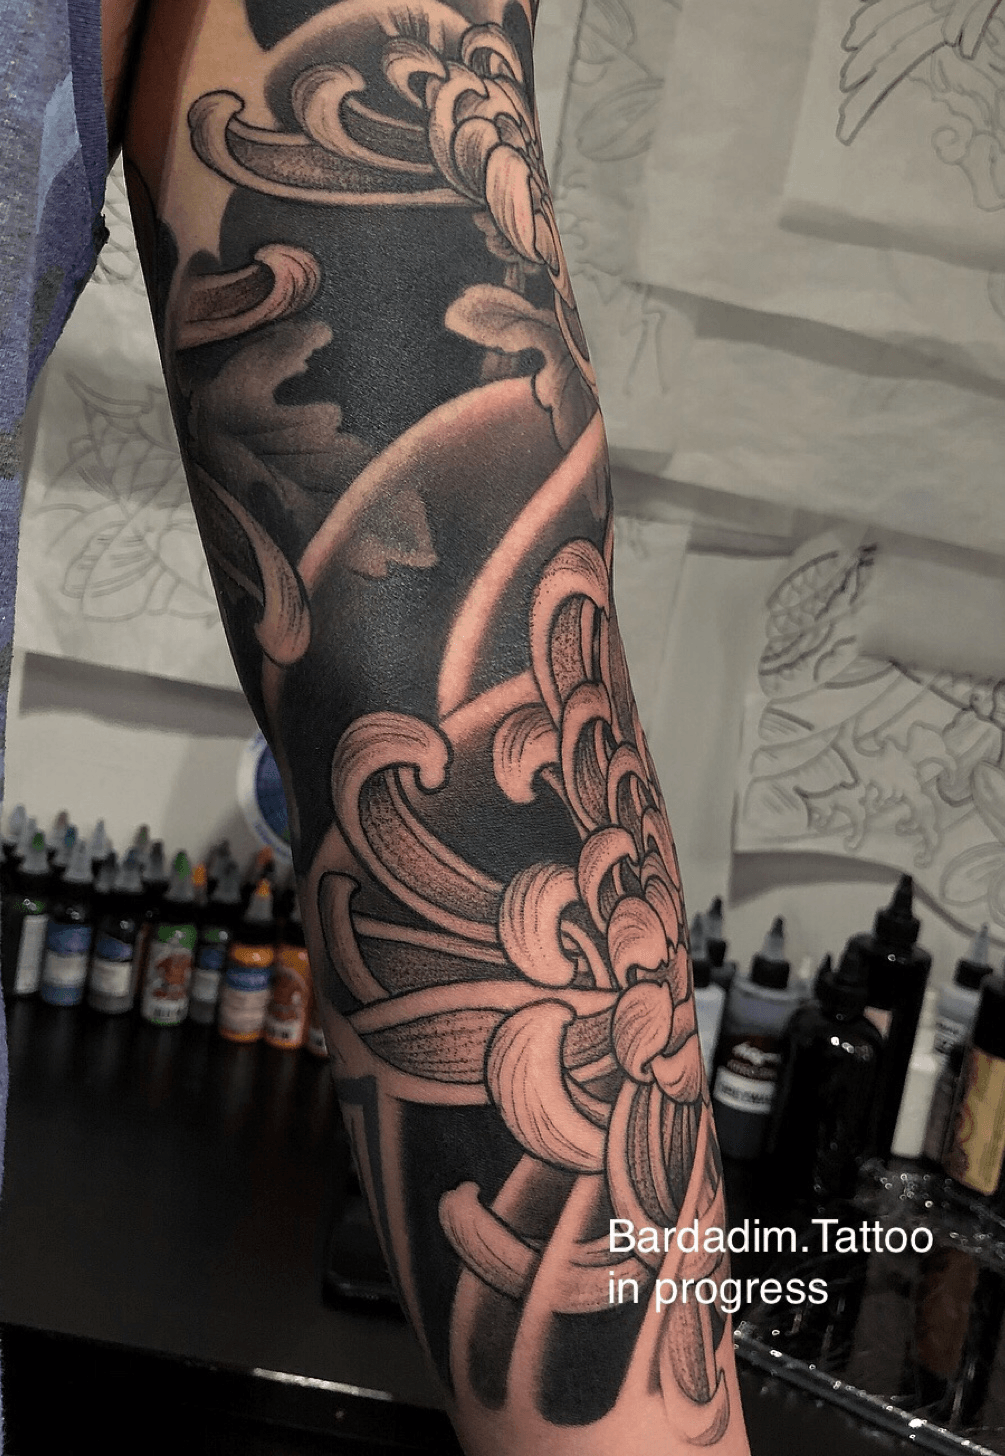 Super intricate Japaneseinspired geometric tattoo sleeve by  jessimanchester Swipe to the side to see a closer look The details are   Instagram